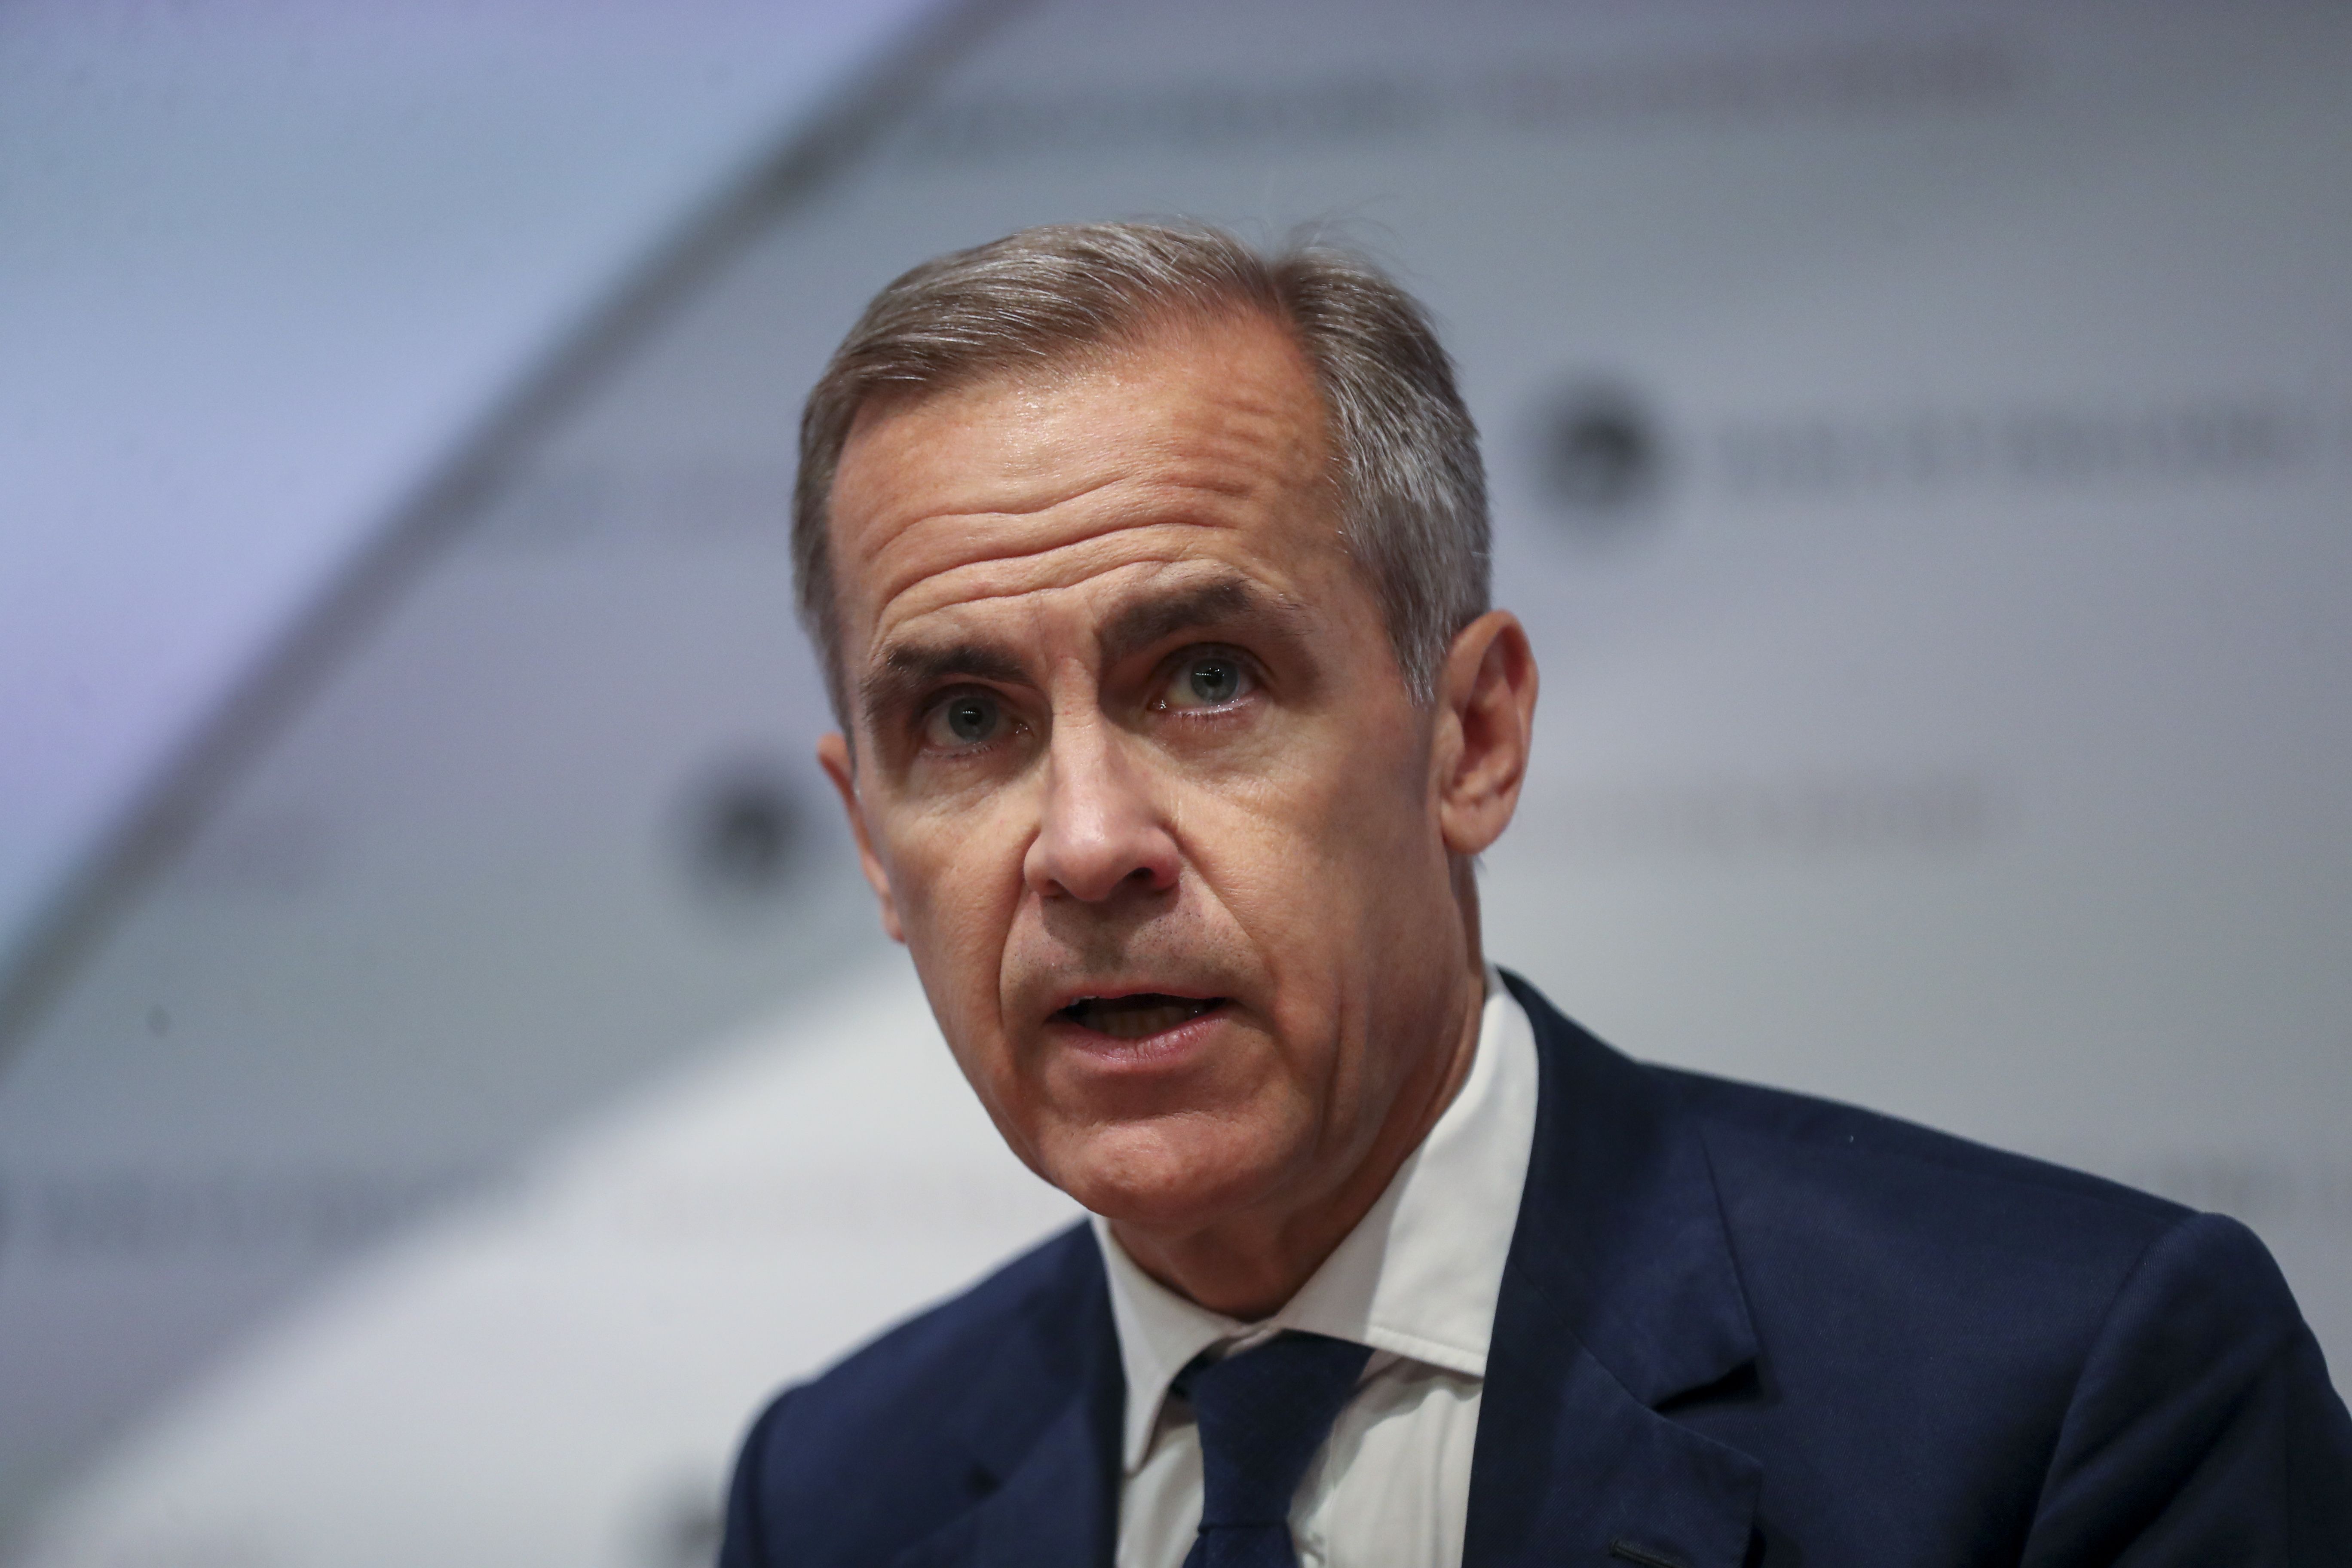 Bank of England Governor Mark Carney says central banks won't be left behind by fintech